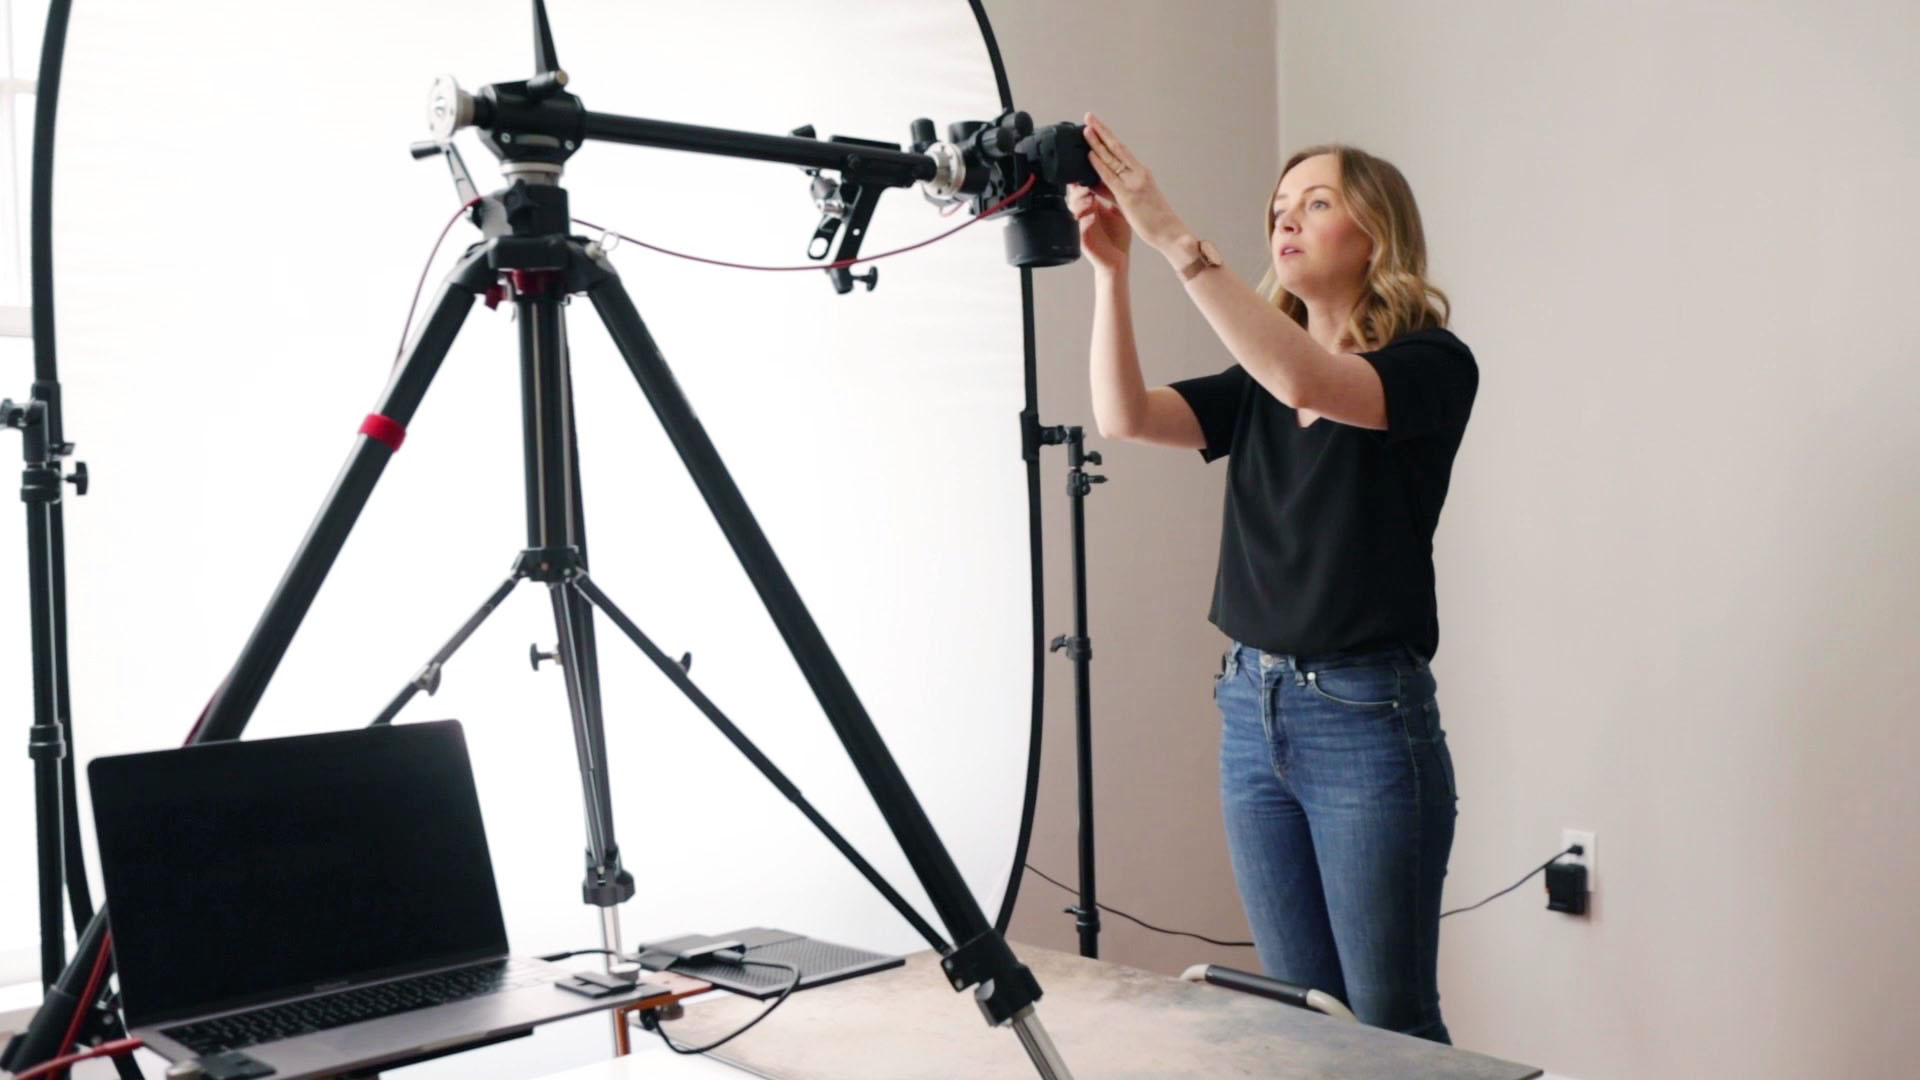 A person setting up a camera on a tripod, which is tethered to a computer, with lighting equipment in the background